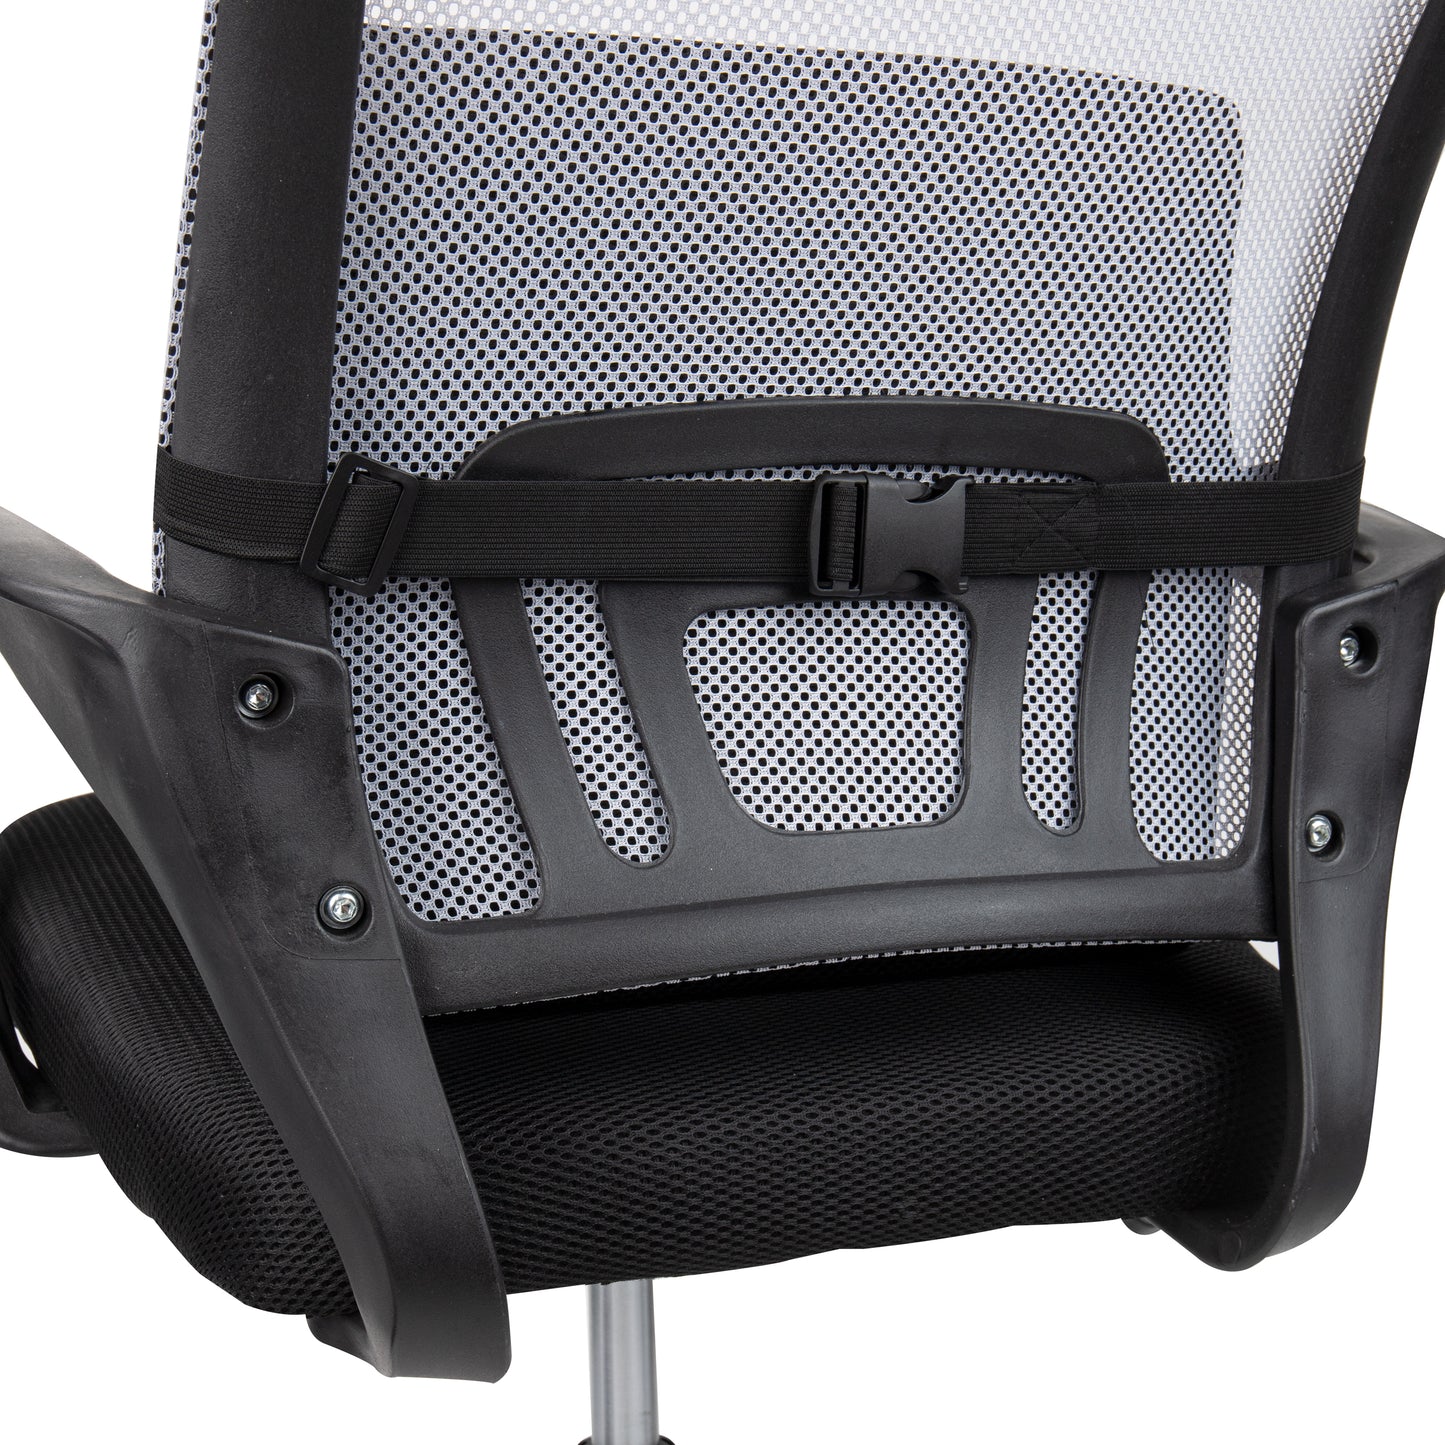 Mind Reader Harmony Collection, Ergonomic Lower Back Cushion, Memory Foam Support, Attaches to Office Chair, Fabric Mesh Surface, Lower Back Pressure Relief, Posture Support, Black